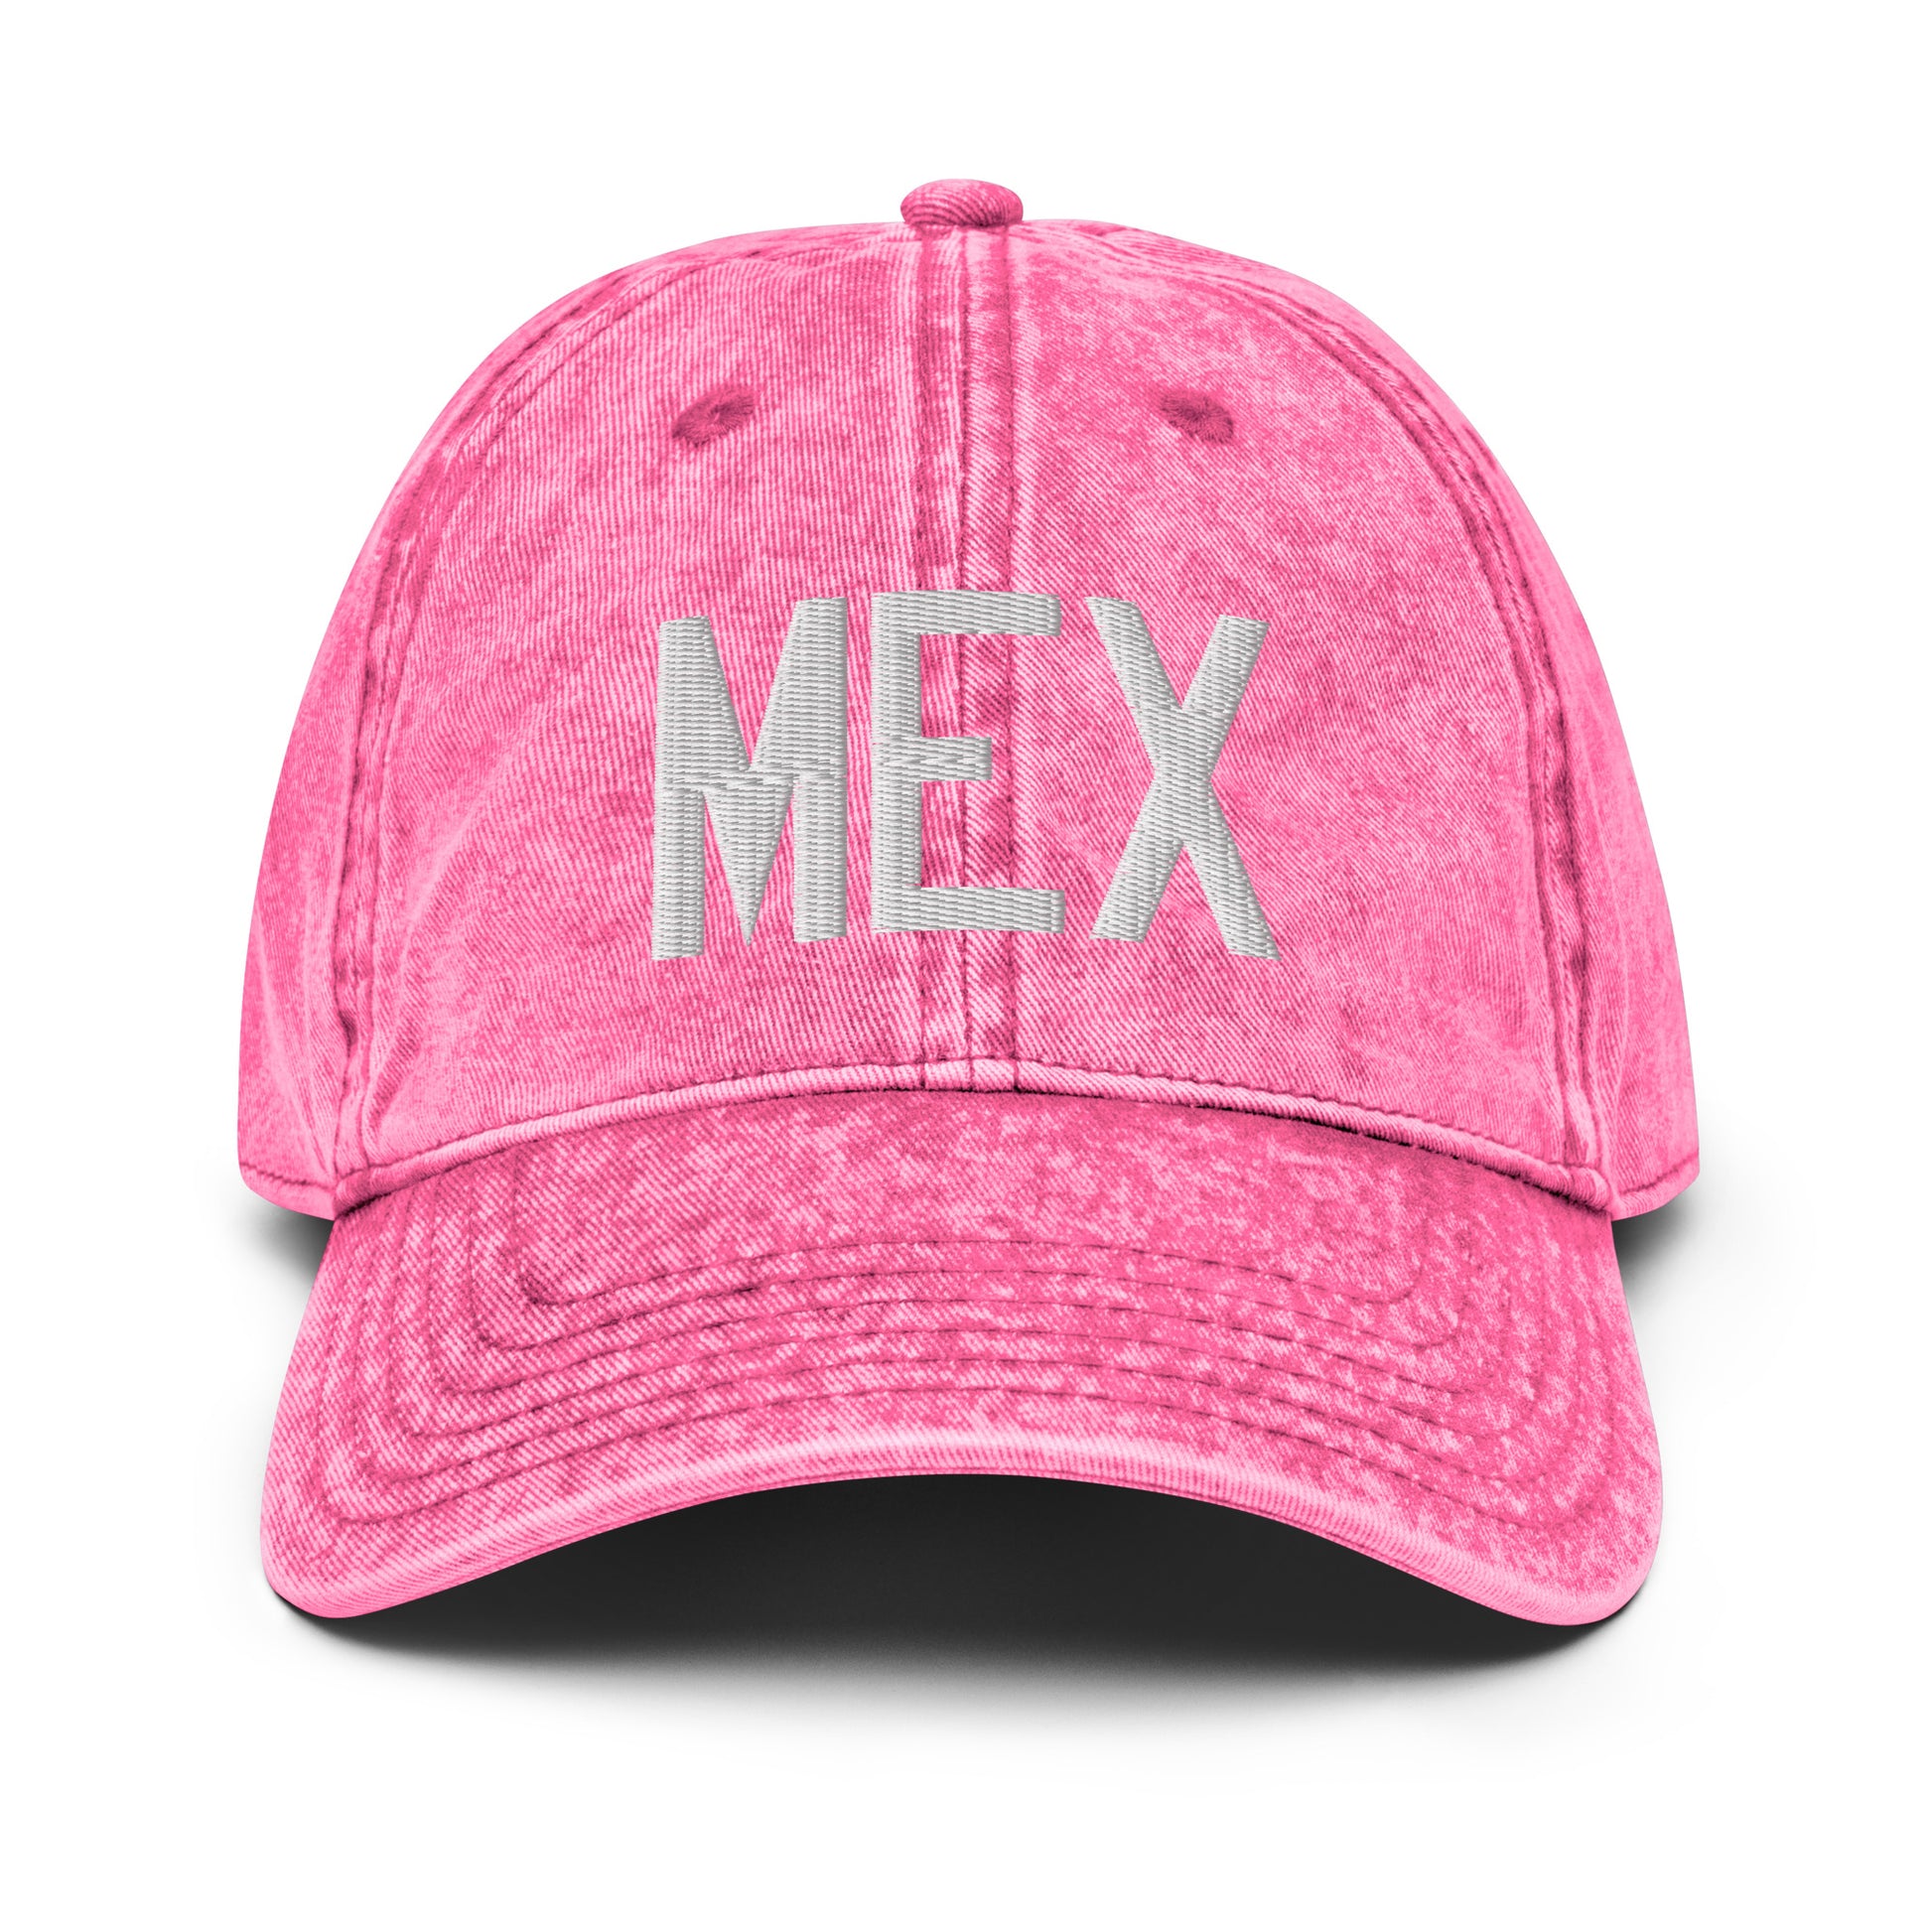 Airport Code Twill Cap - White • MEX Mexico City • YHM Designs - Image 25